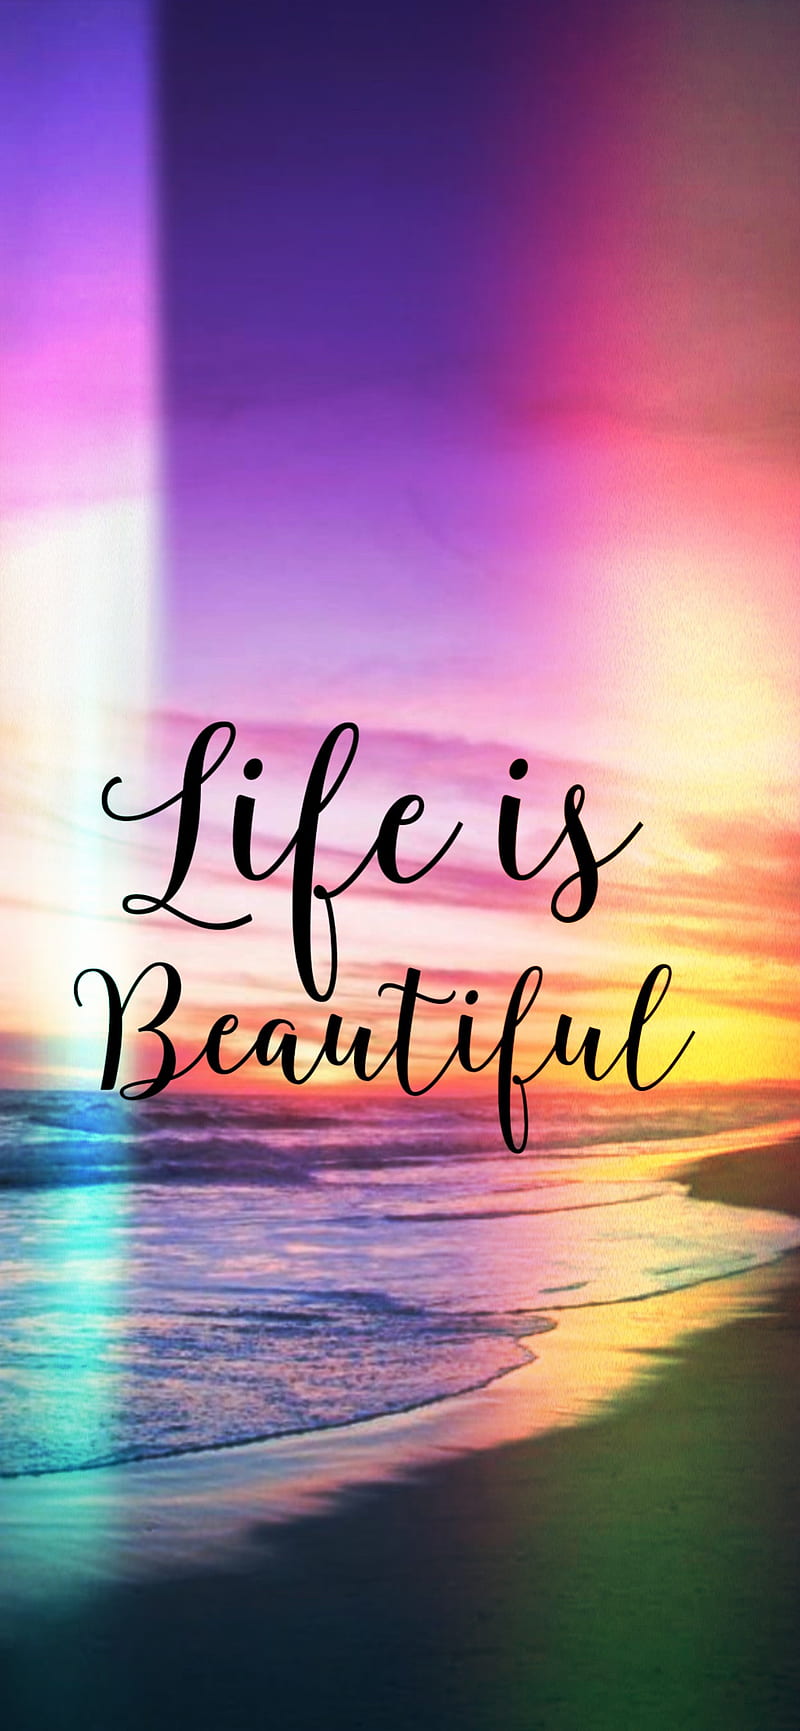 Life is Beautiful, beach, colorful, ocean, quote, quotes, sea ...